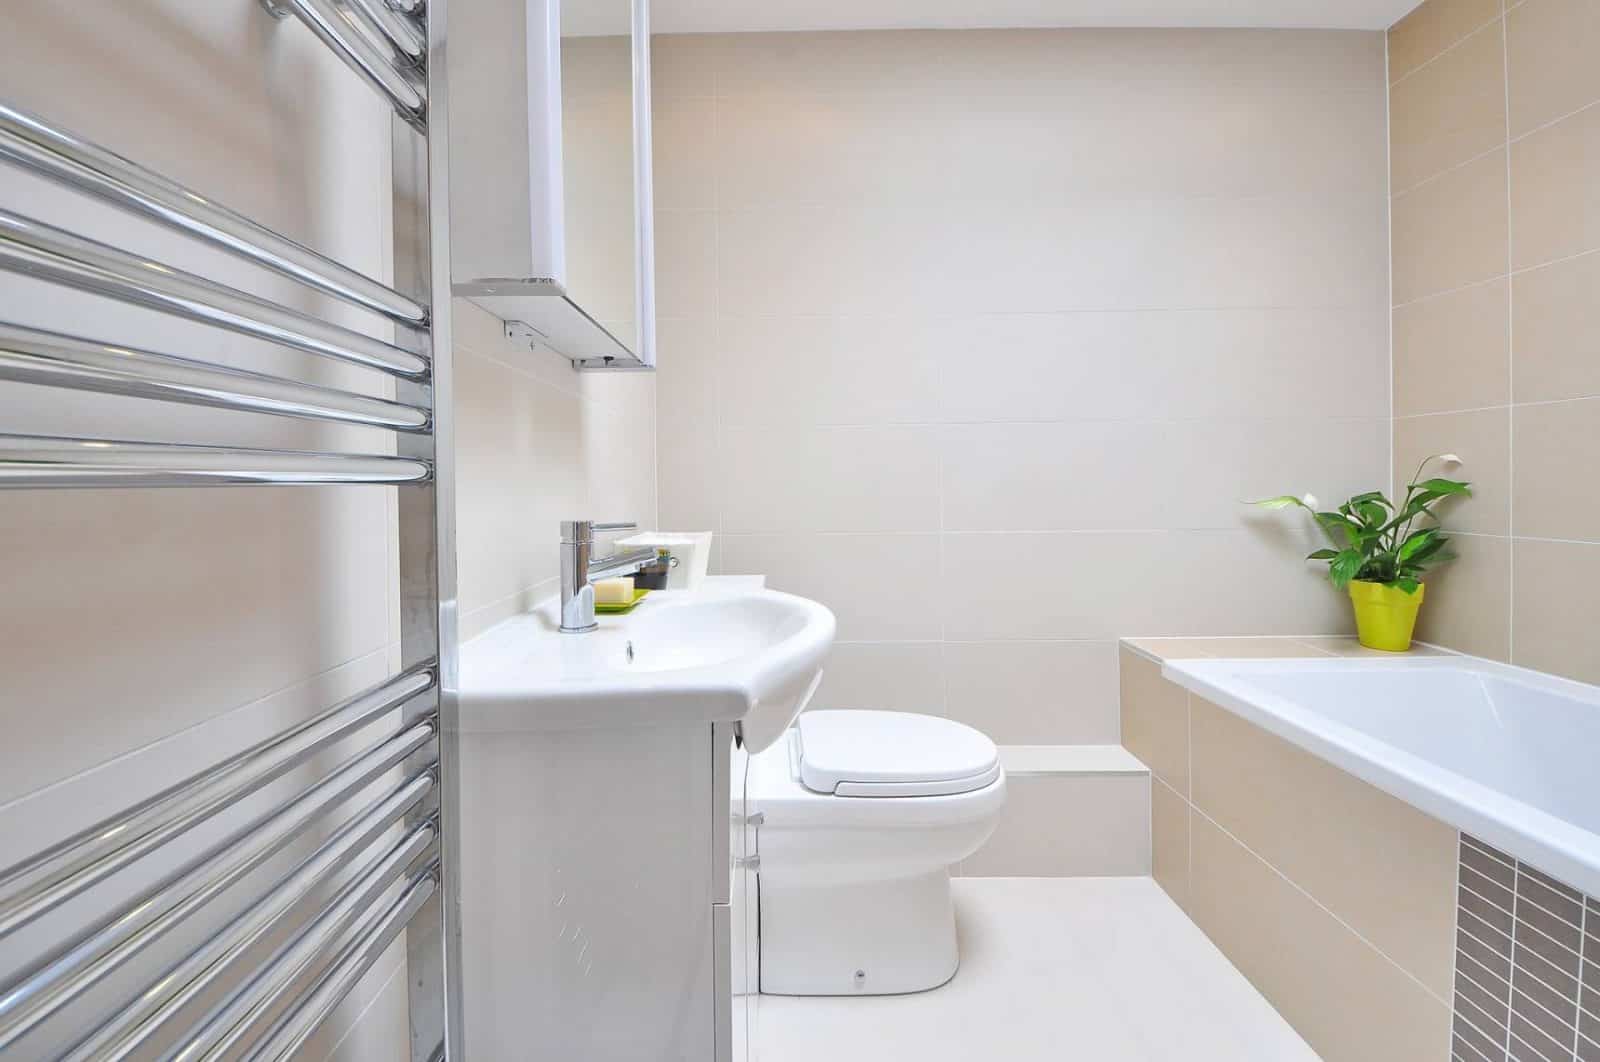 space in a small bathroom